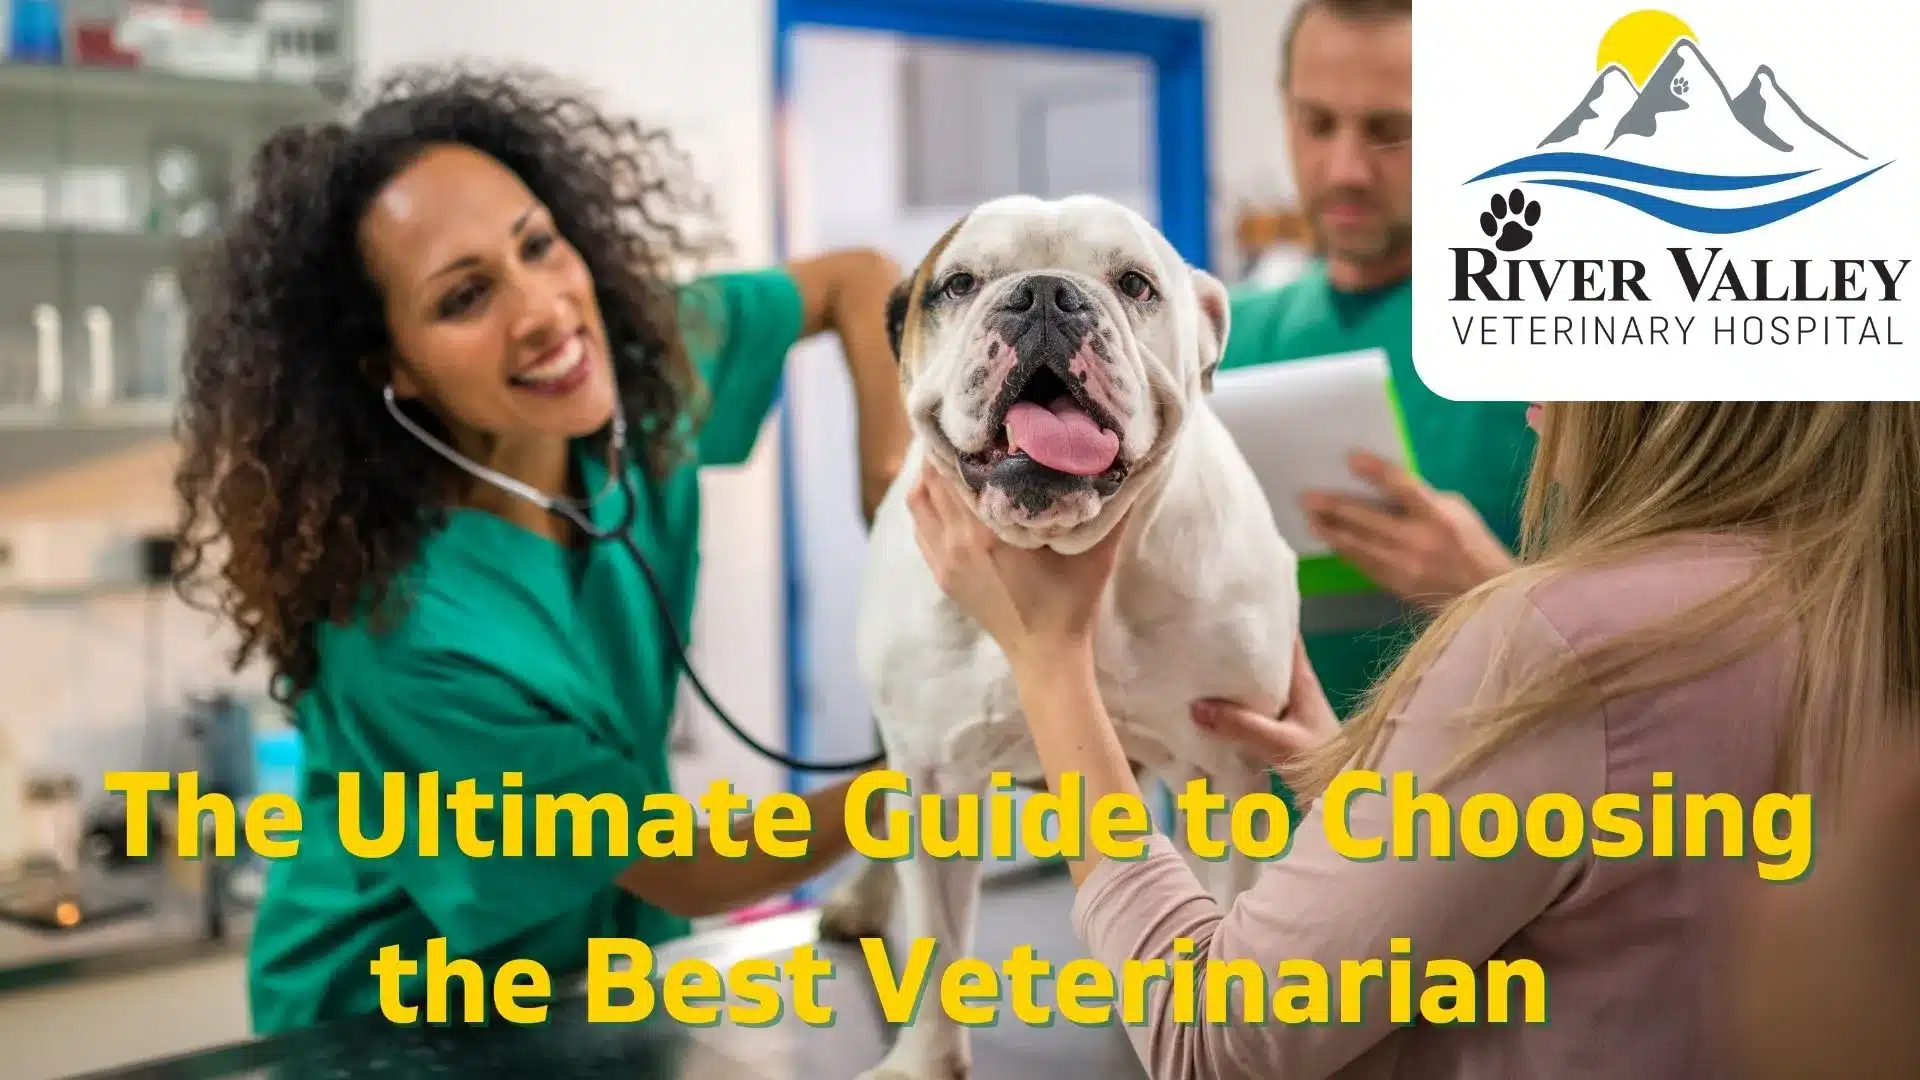 The Ultimate Guide to Choosing the Best Veterinarian